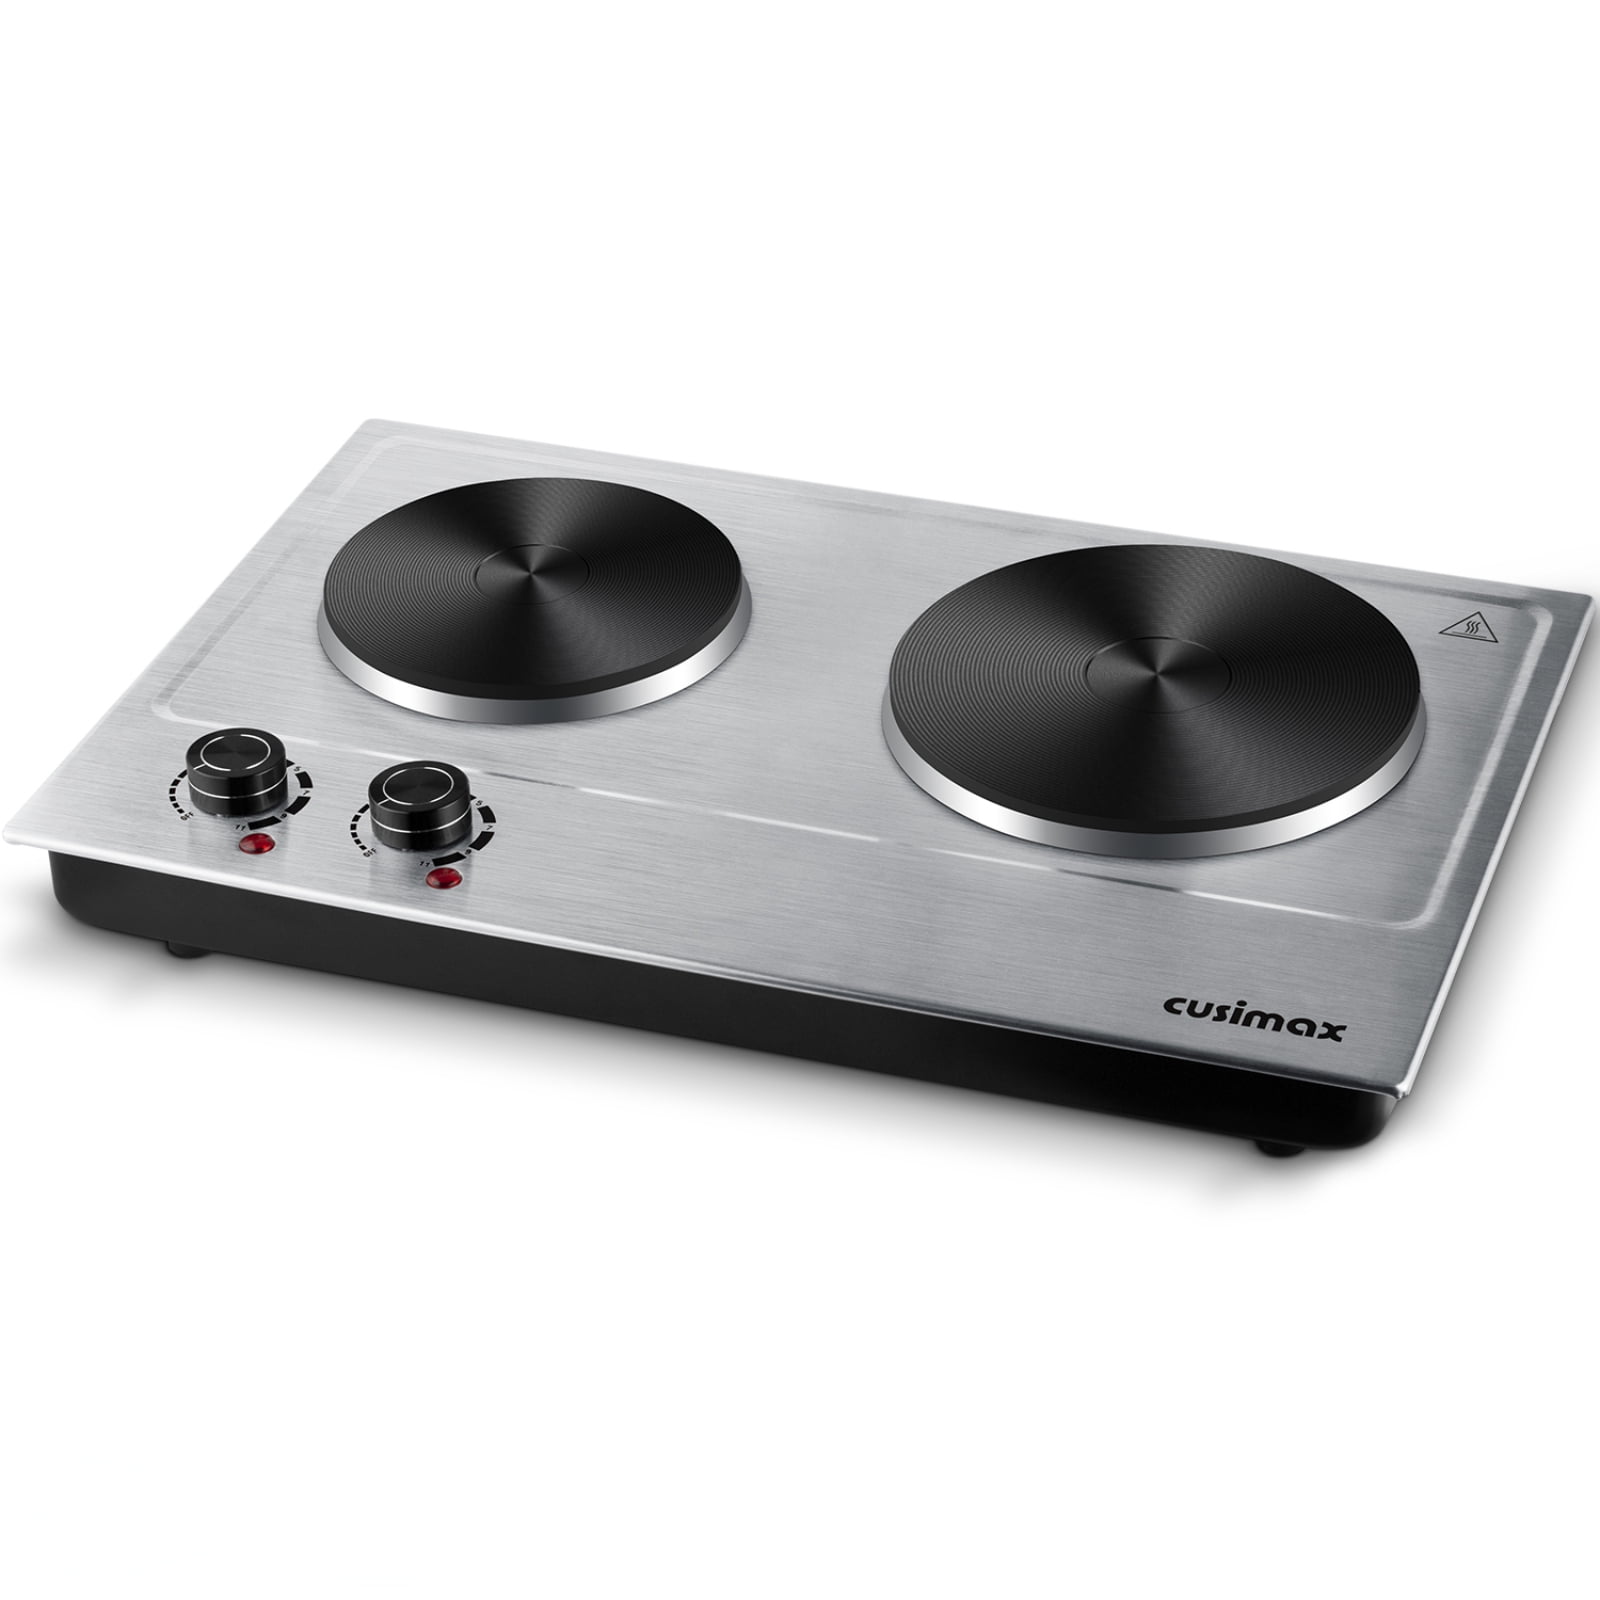 Farberware Royalty 1800 W Double Burner Black Electric Cooktop, 1 Each,  assembled product